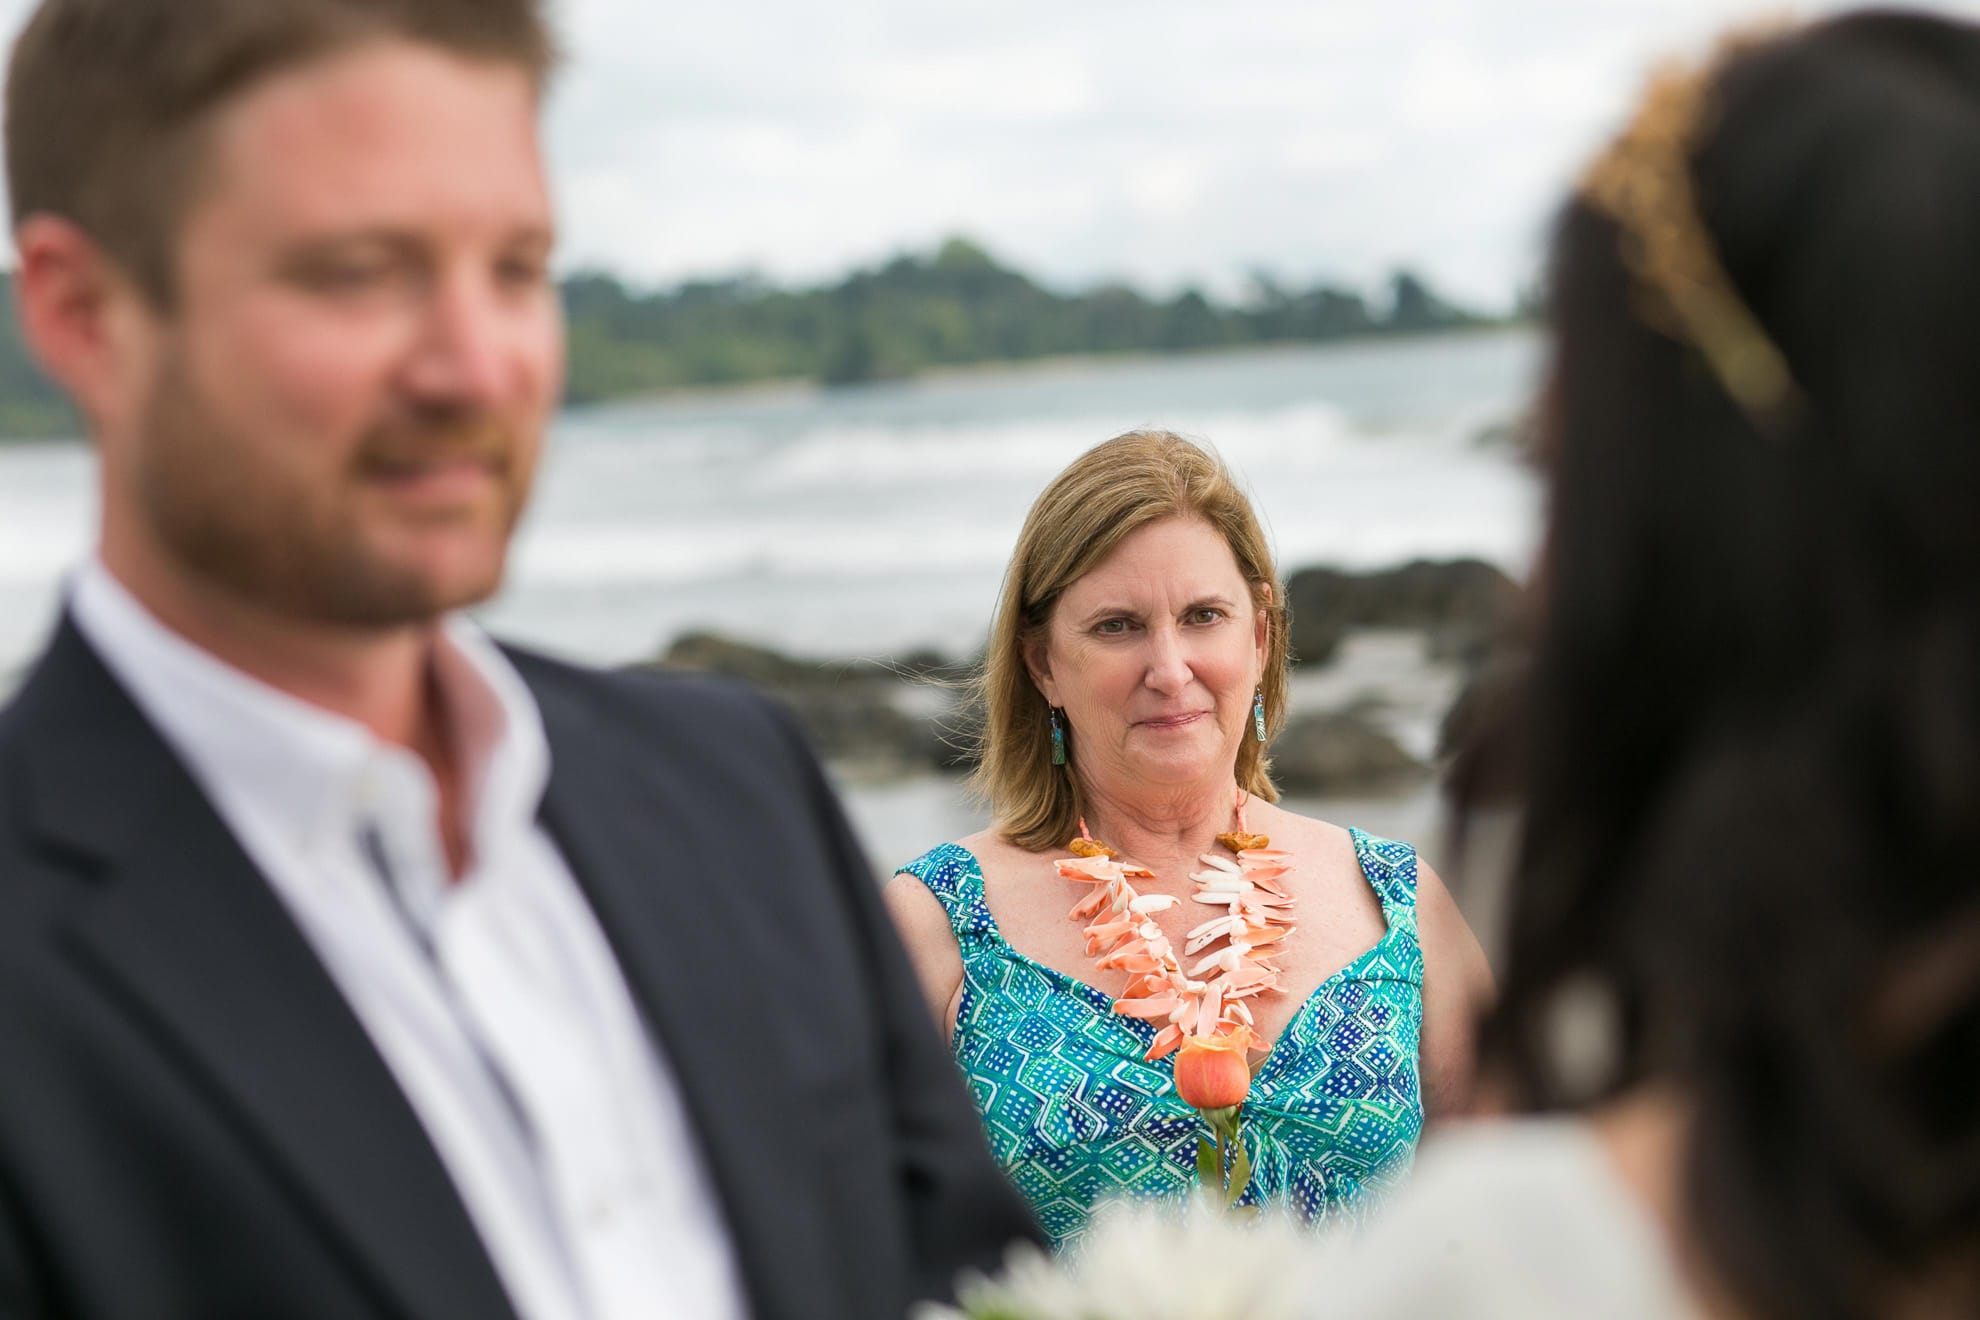 Mother of the groom at the intimate wedding in Costa Rica